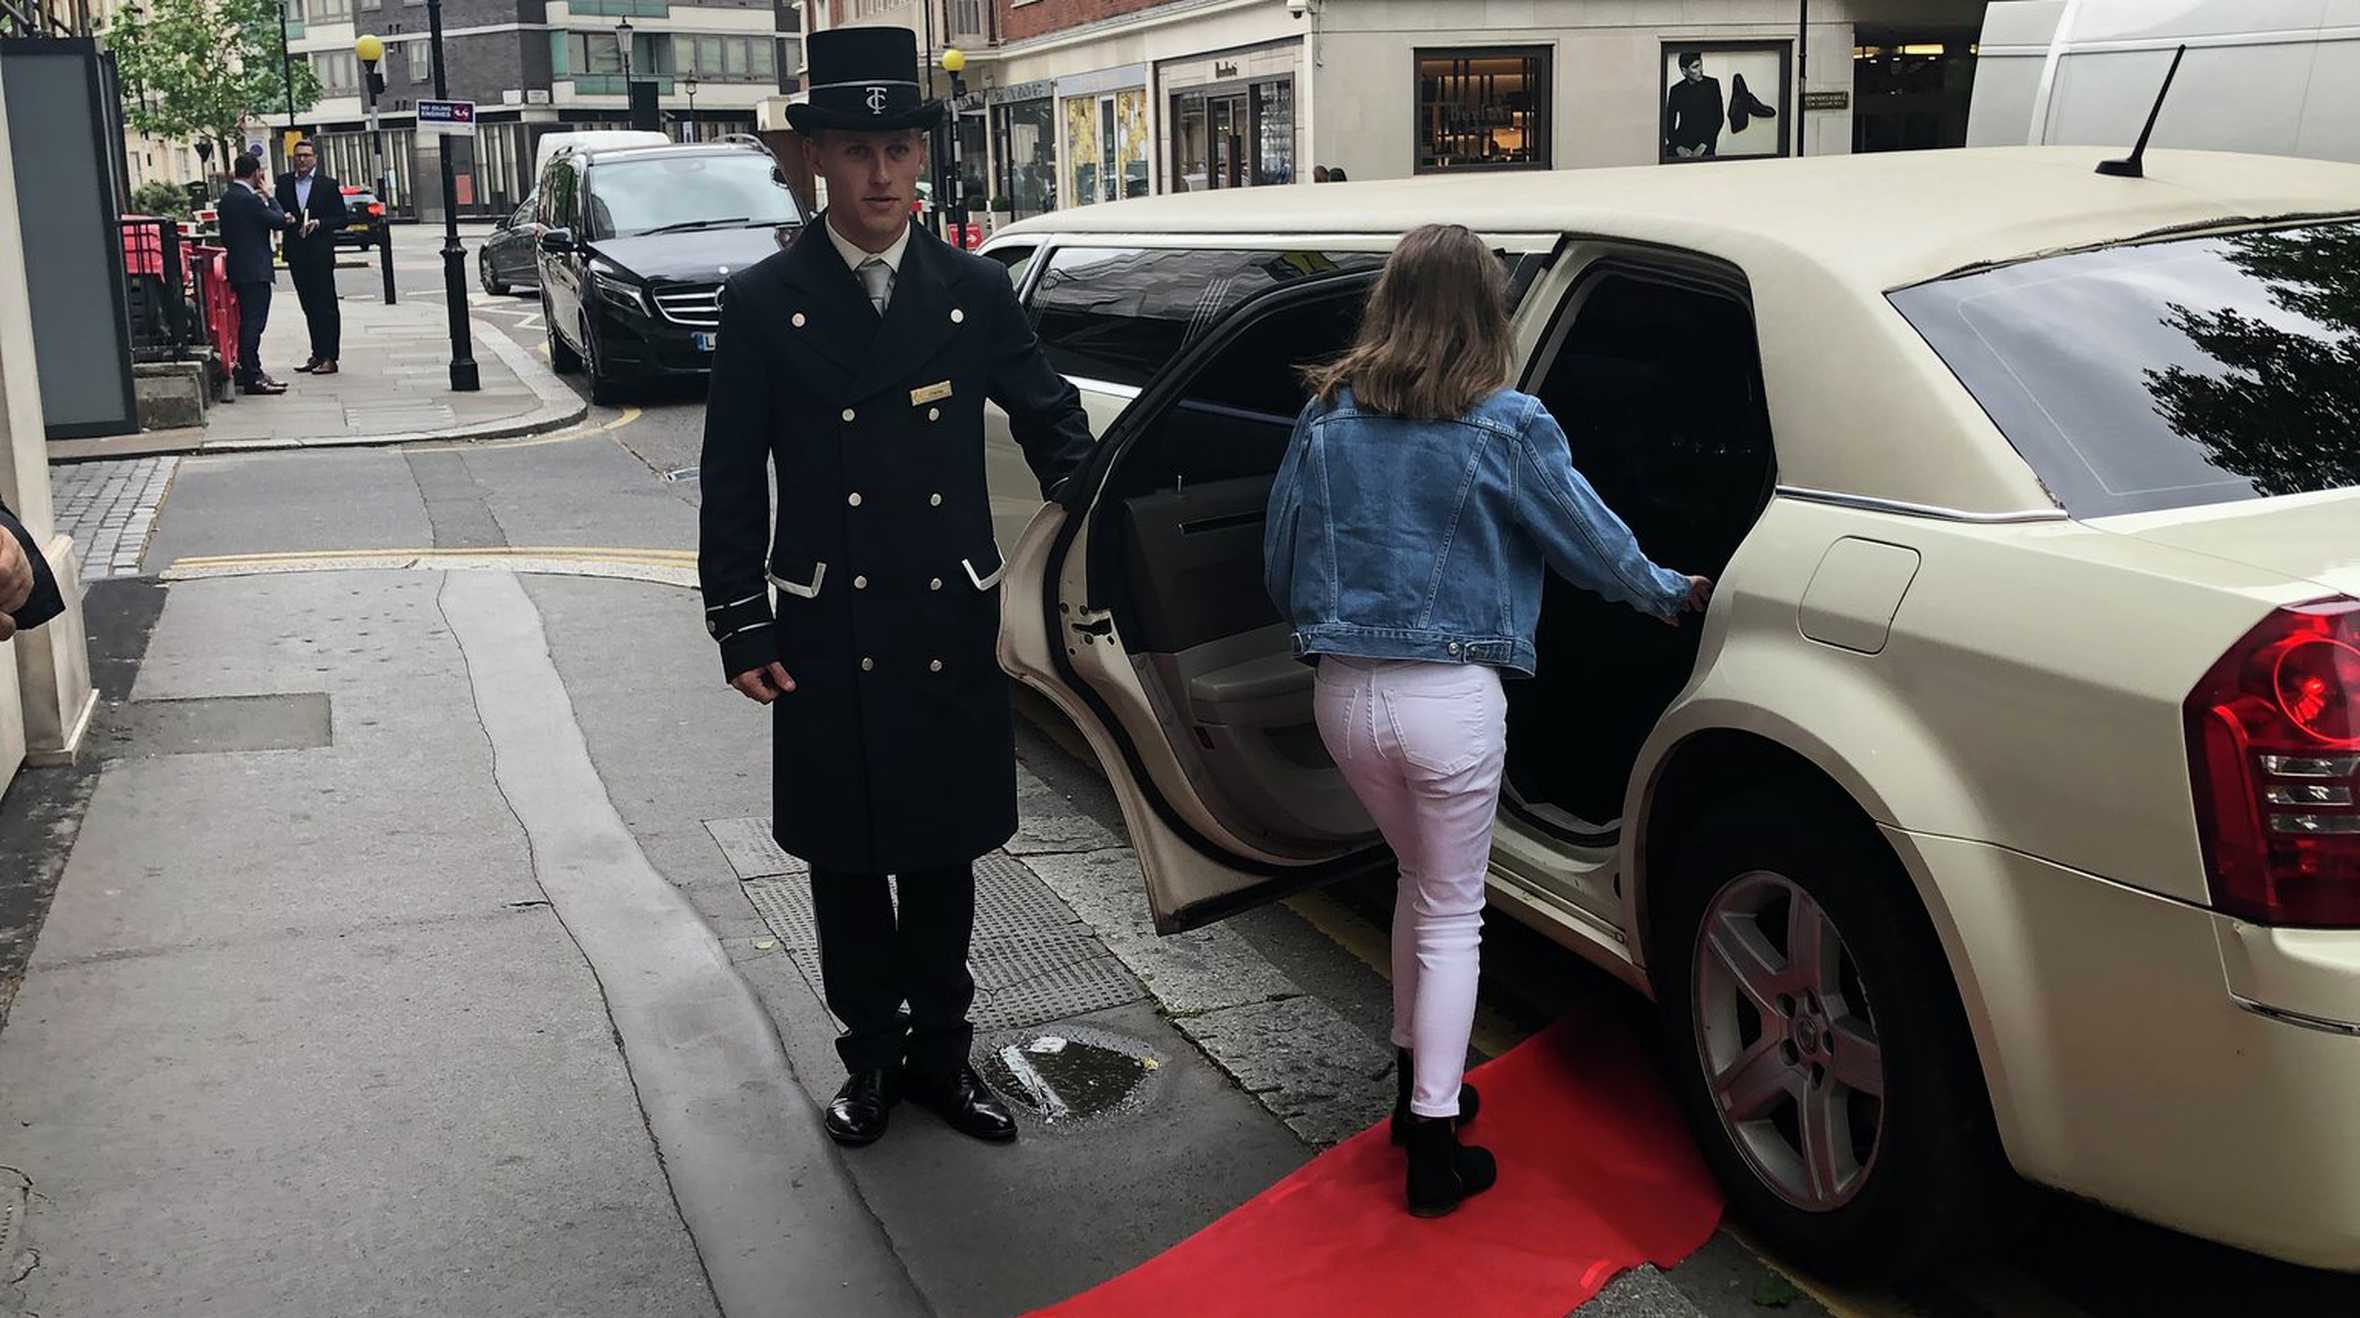 Meadow taking the red carpet to her limo